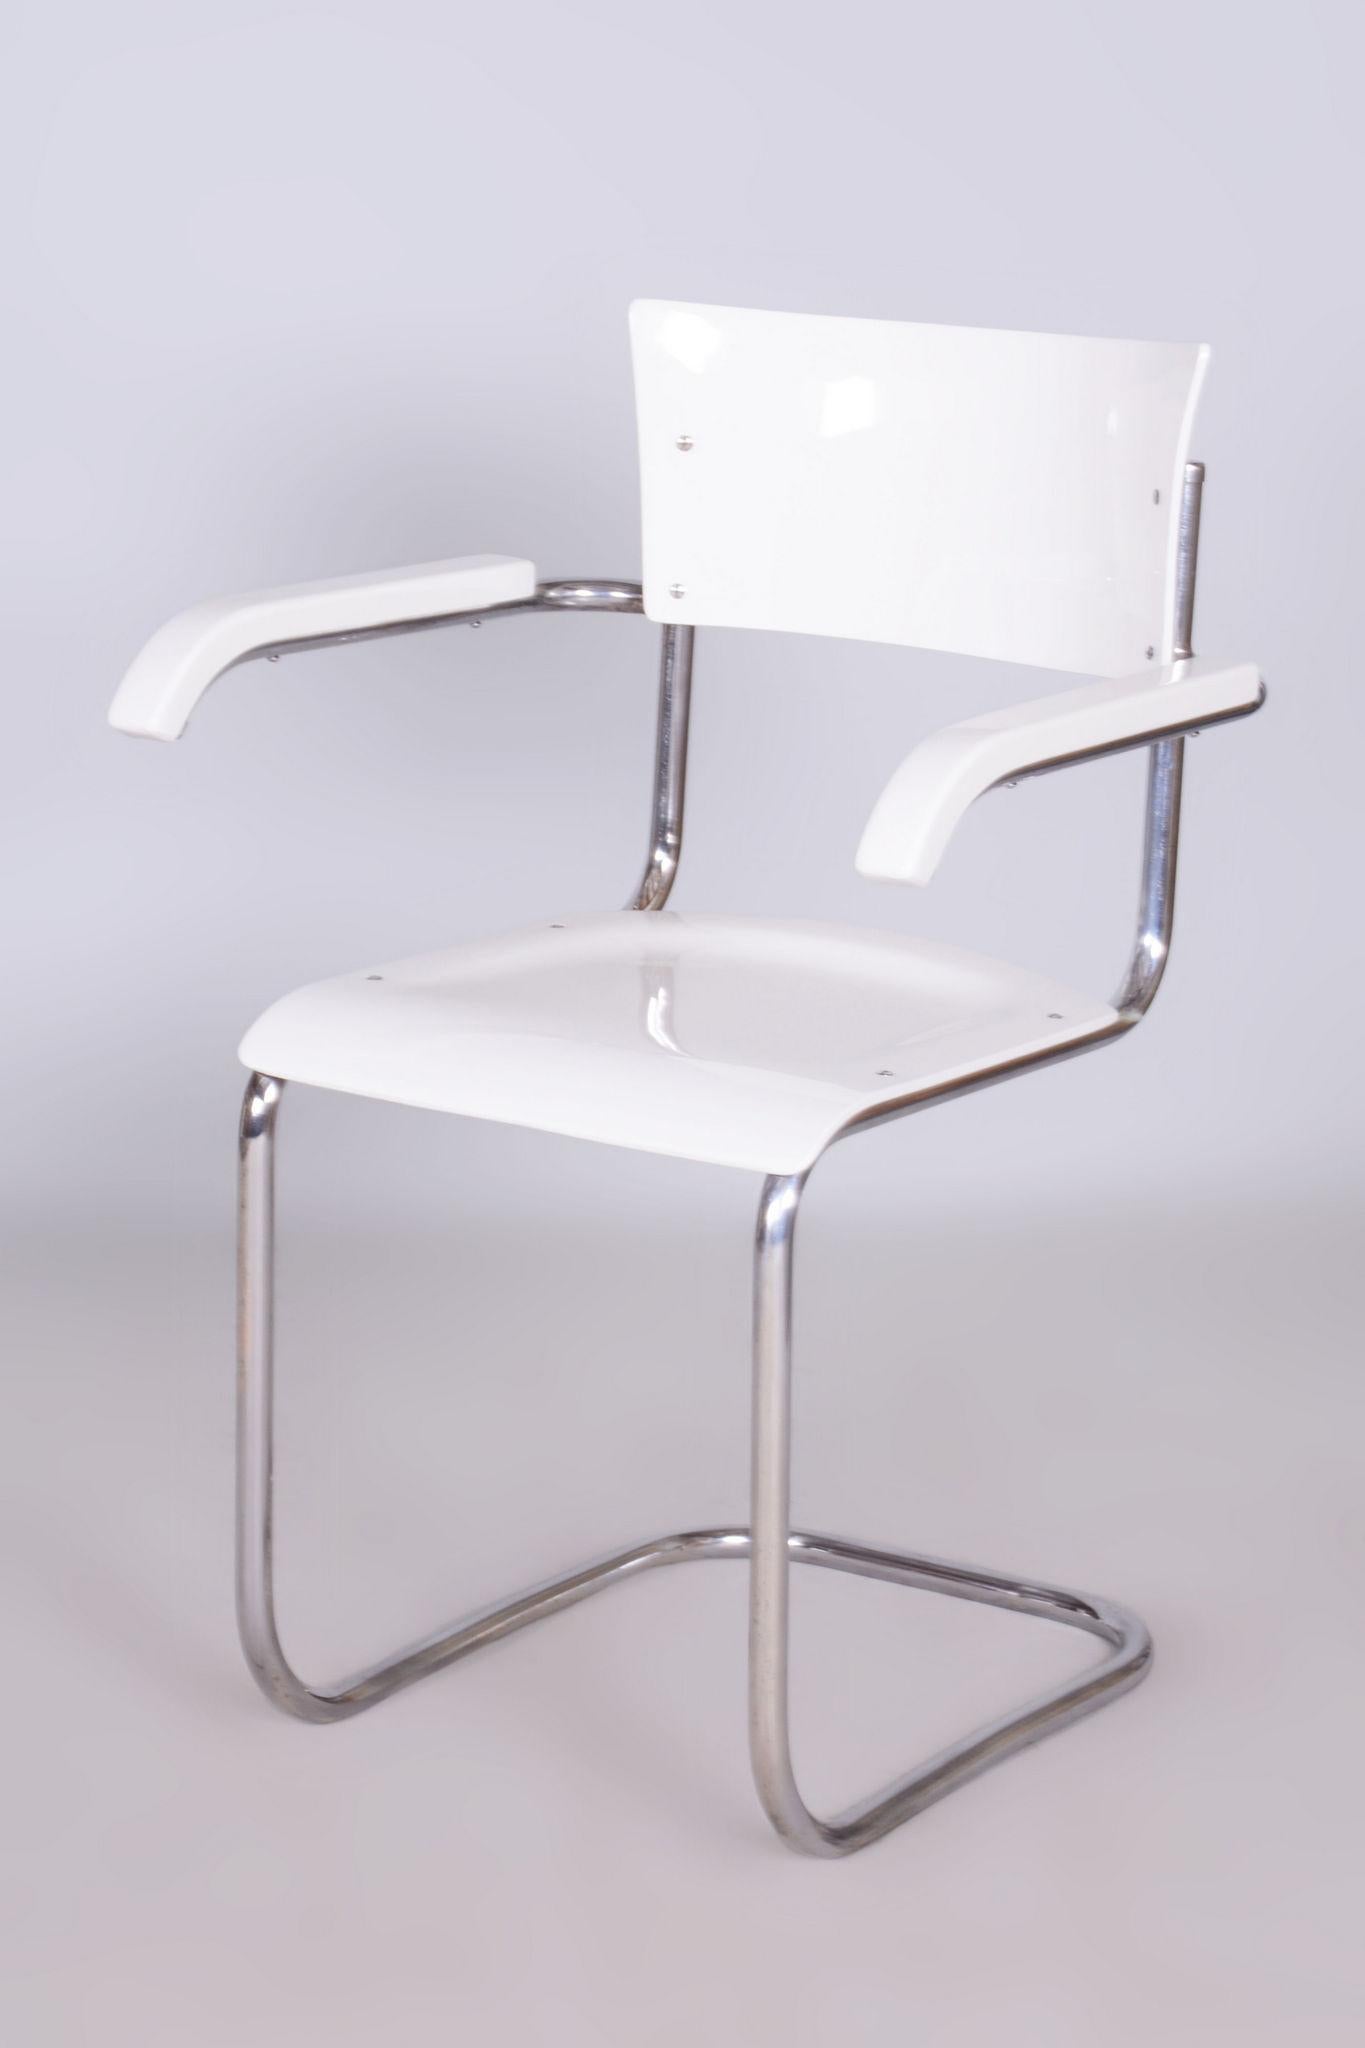 Czech Restored Bauhaus Pair of Chairs, by Mart Stam, Chrome, Germany, 1930s For Sale